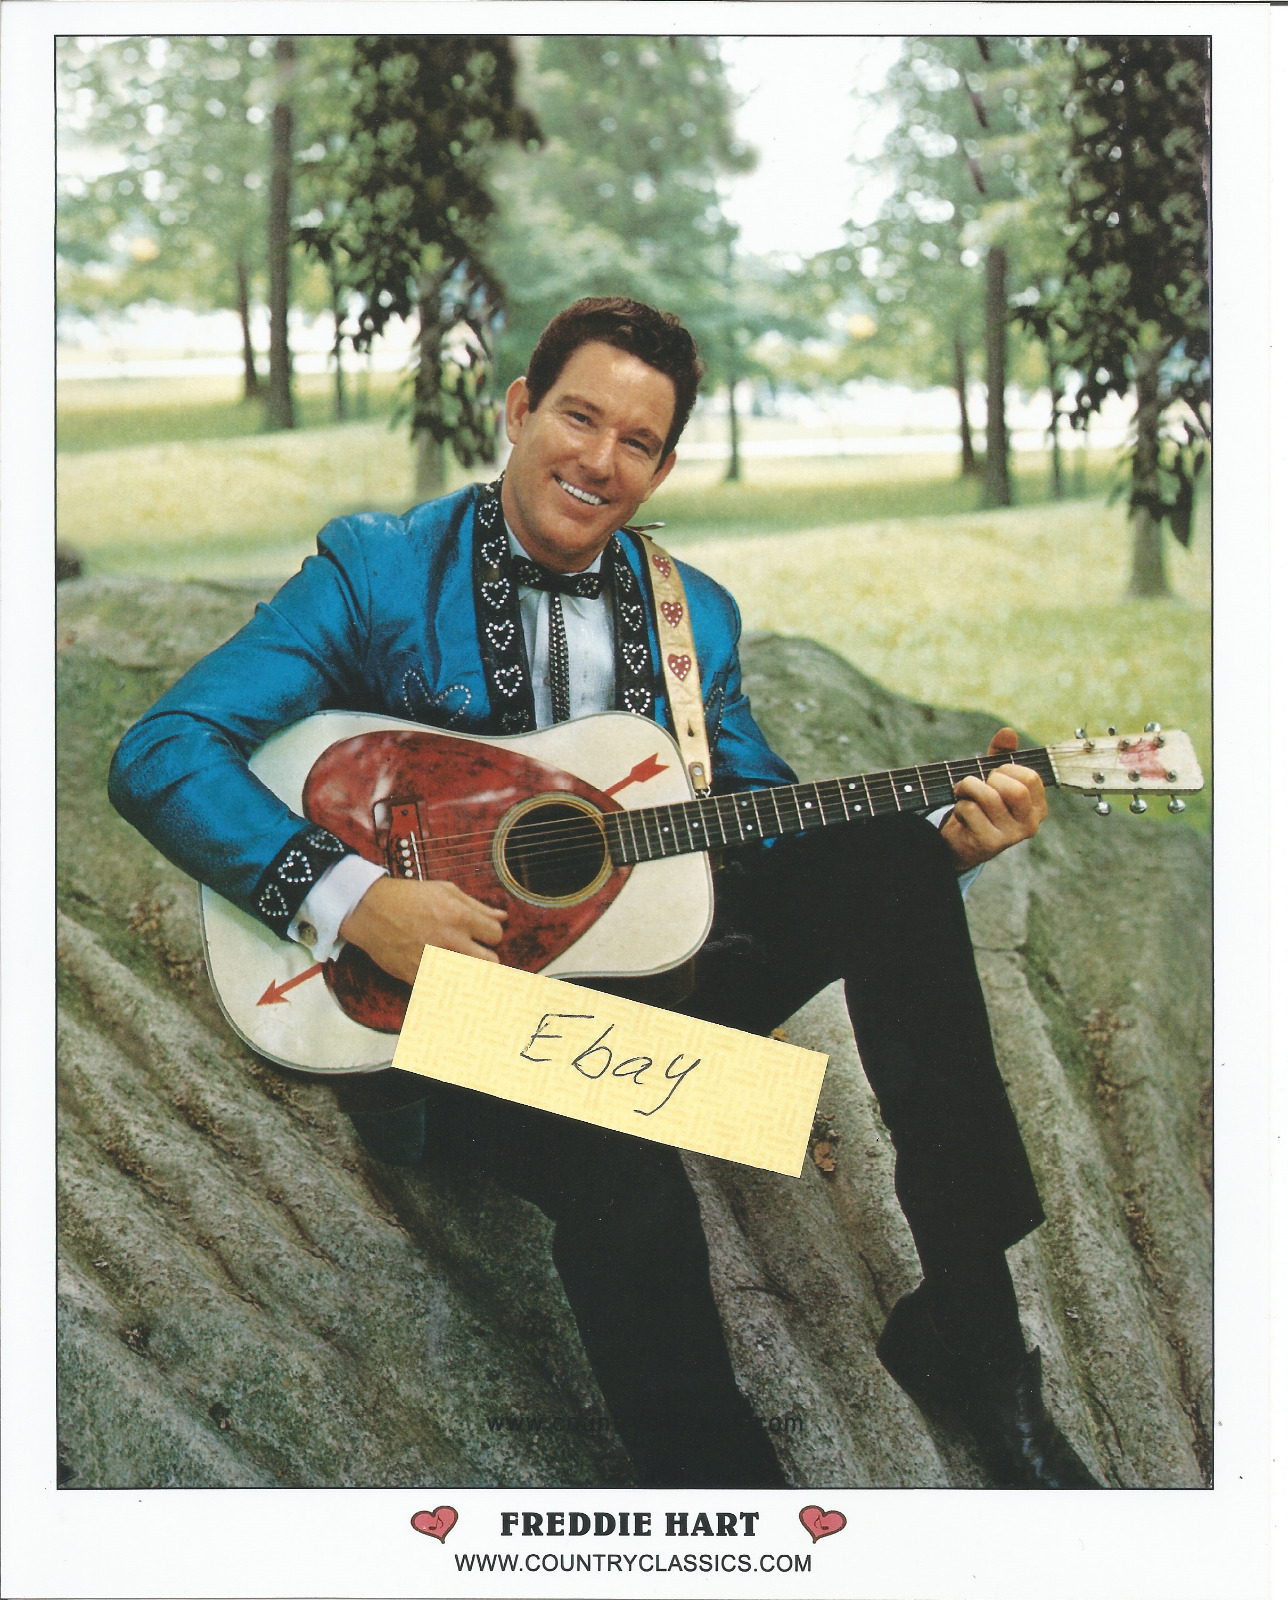 Freddie Hart 8X10 Glossy Color Publicity Photo Kapp Records 1960's guitar pose